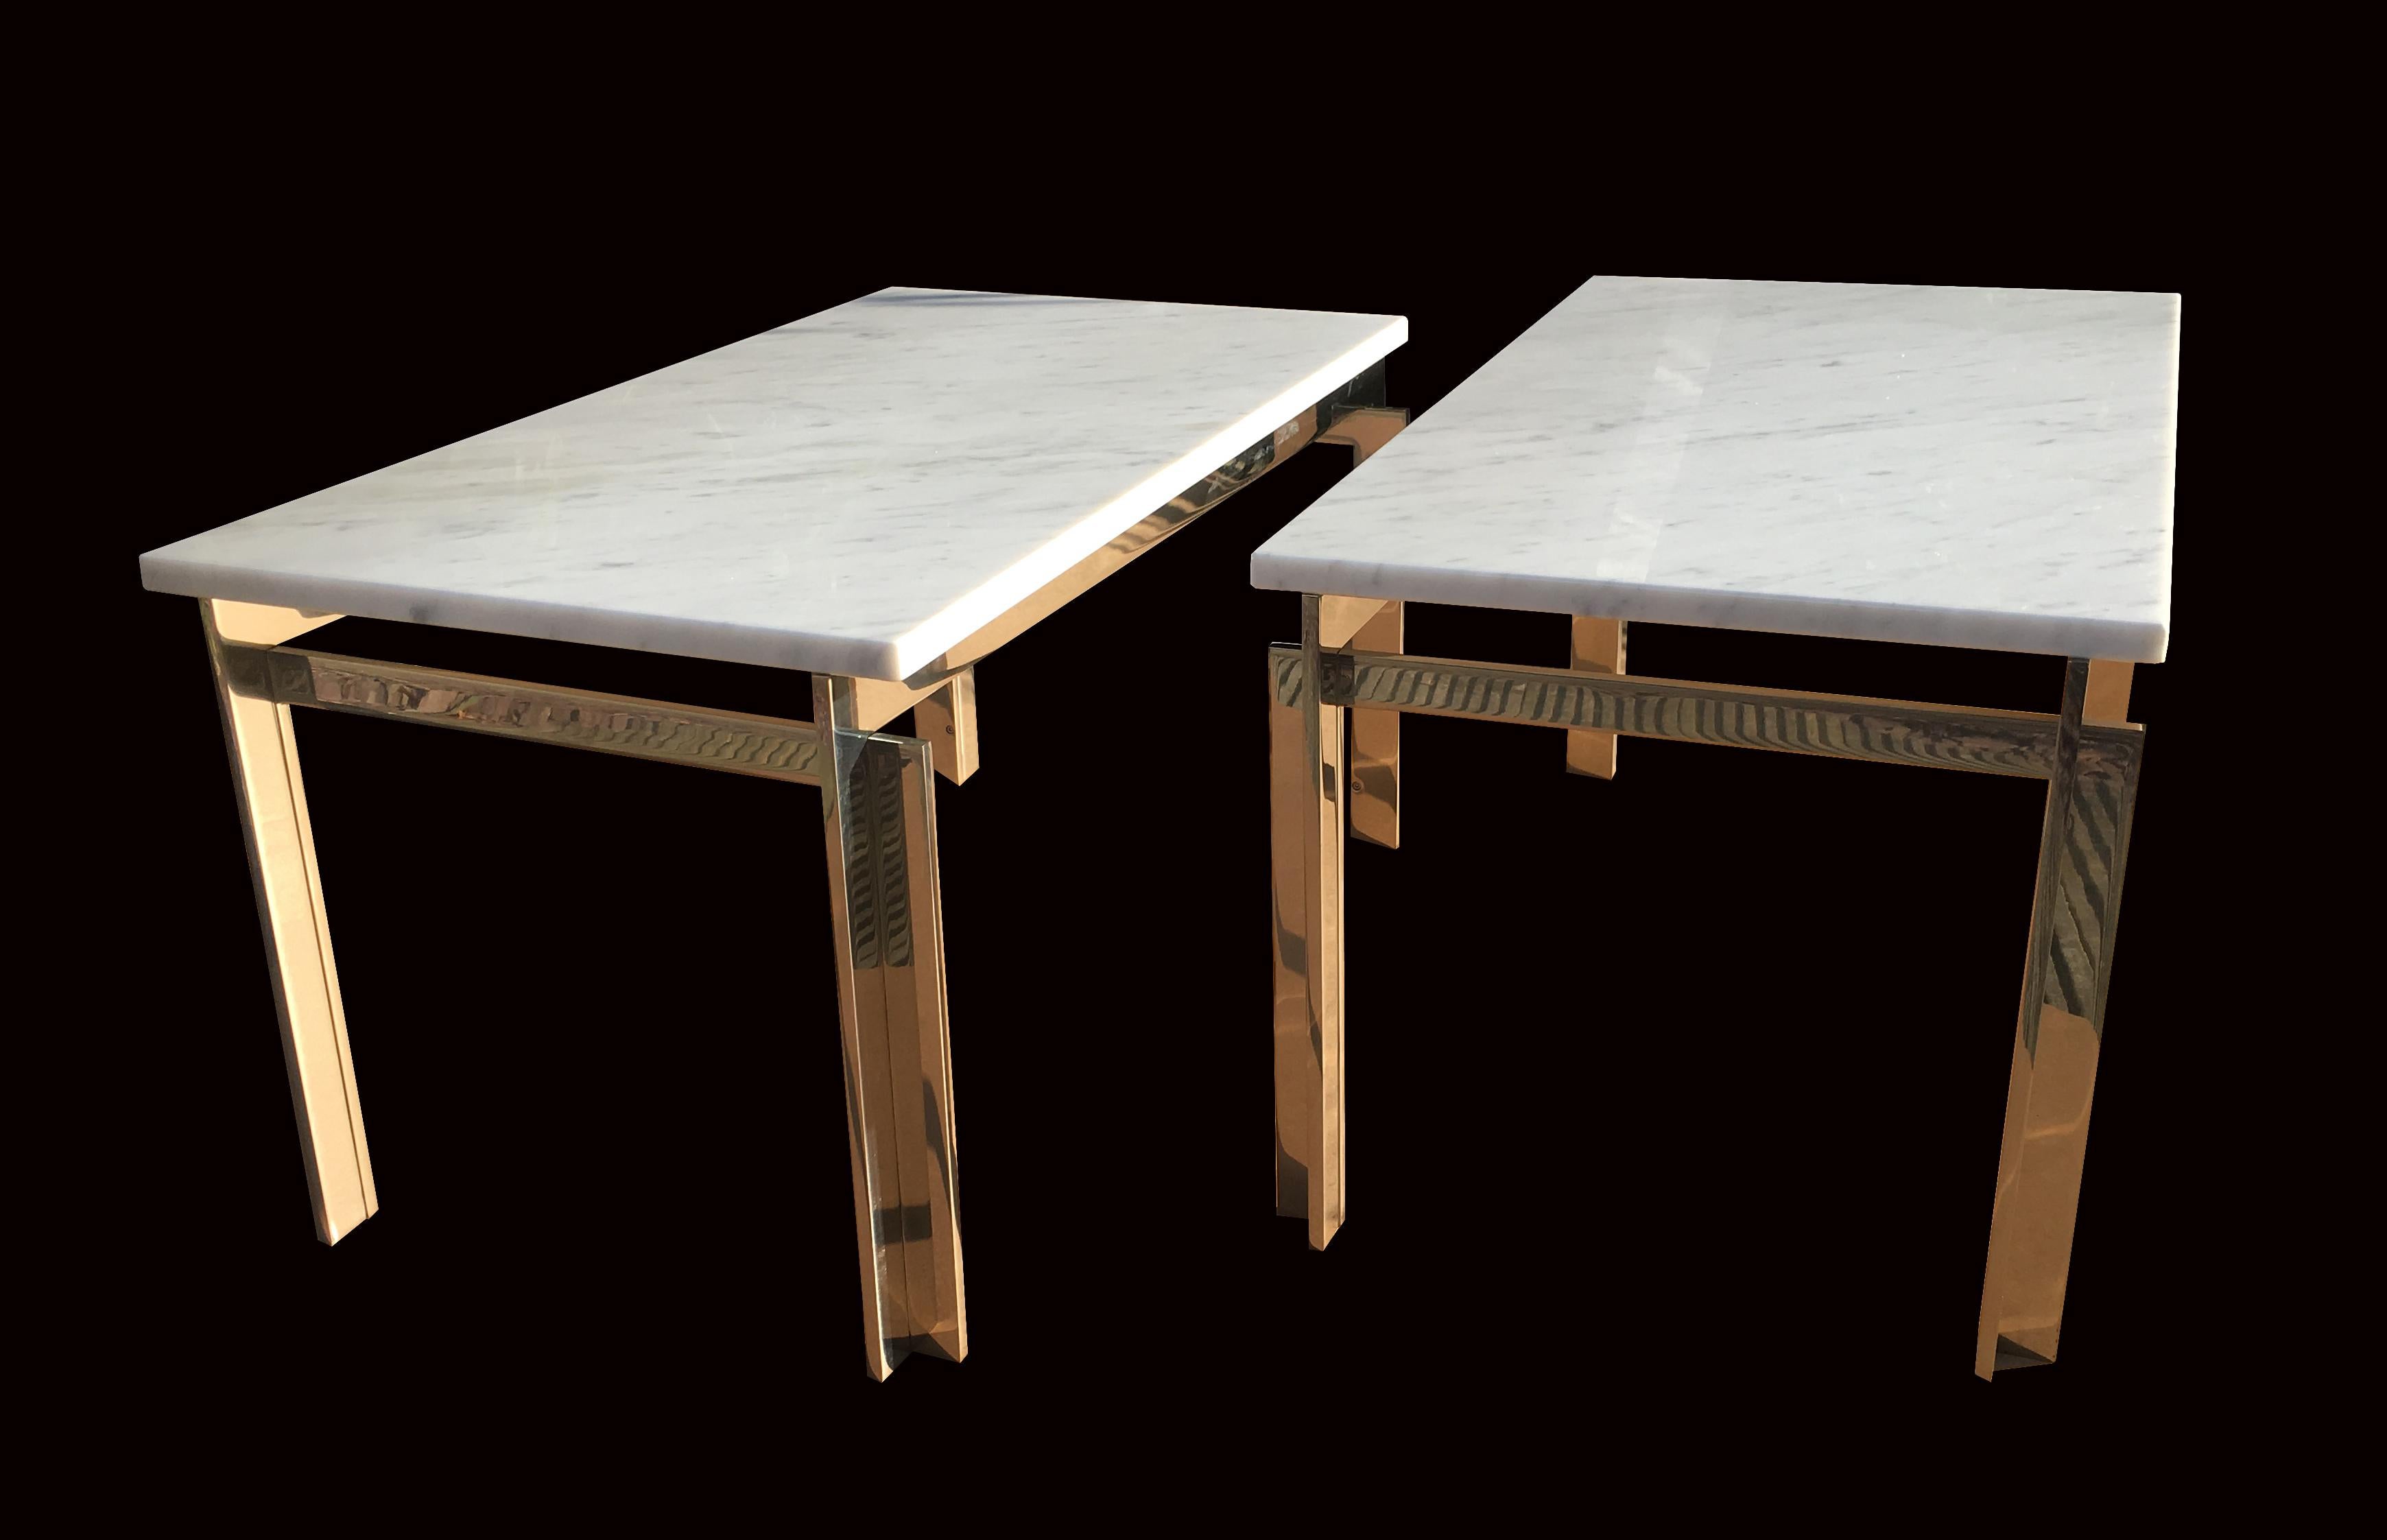 Stainless Steel and Carrara Marble Tables in the Style of Poul Kjaerholm For Sale 2